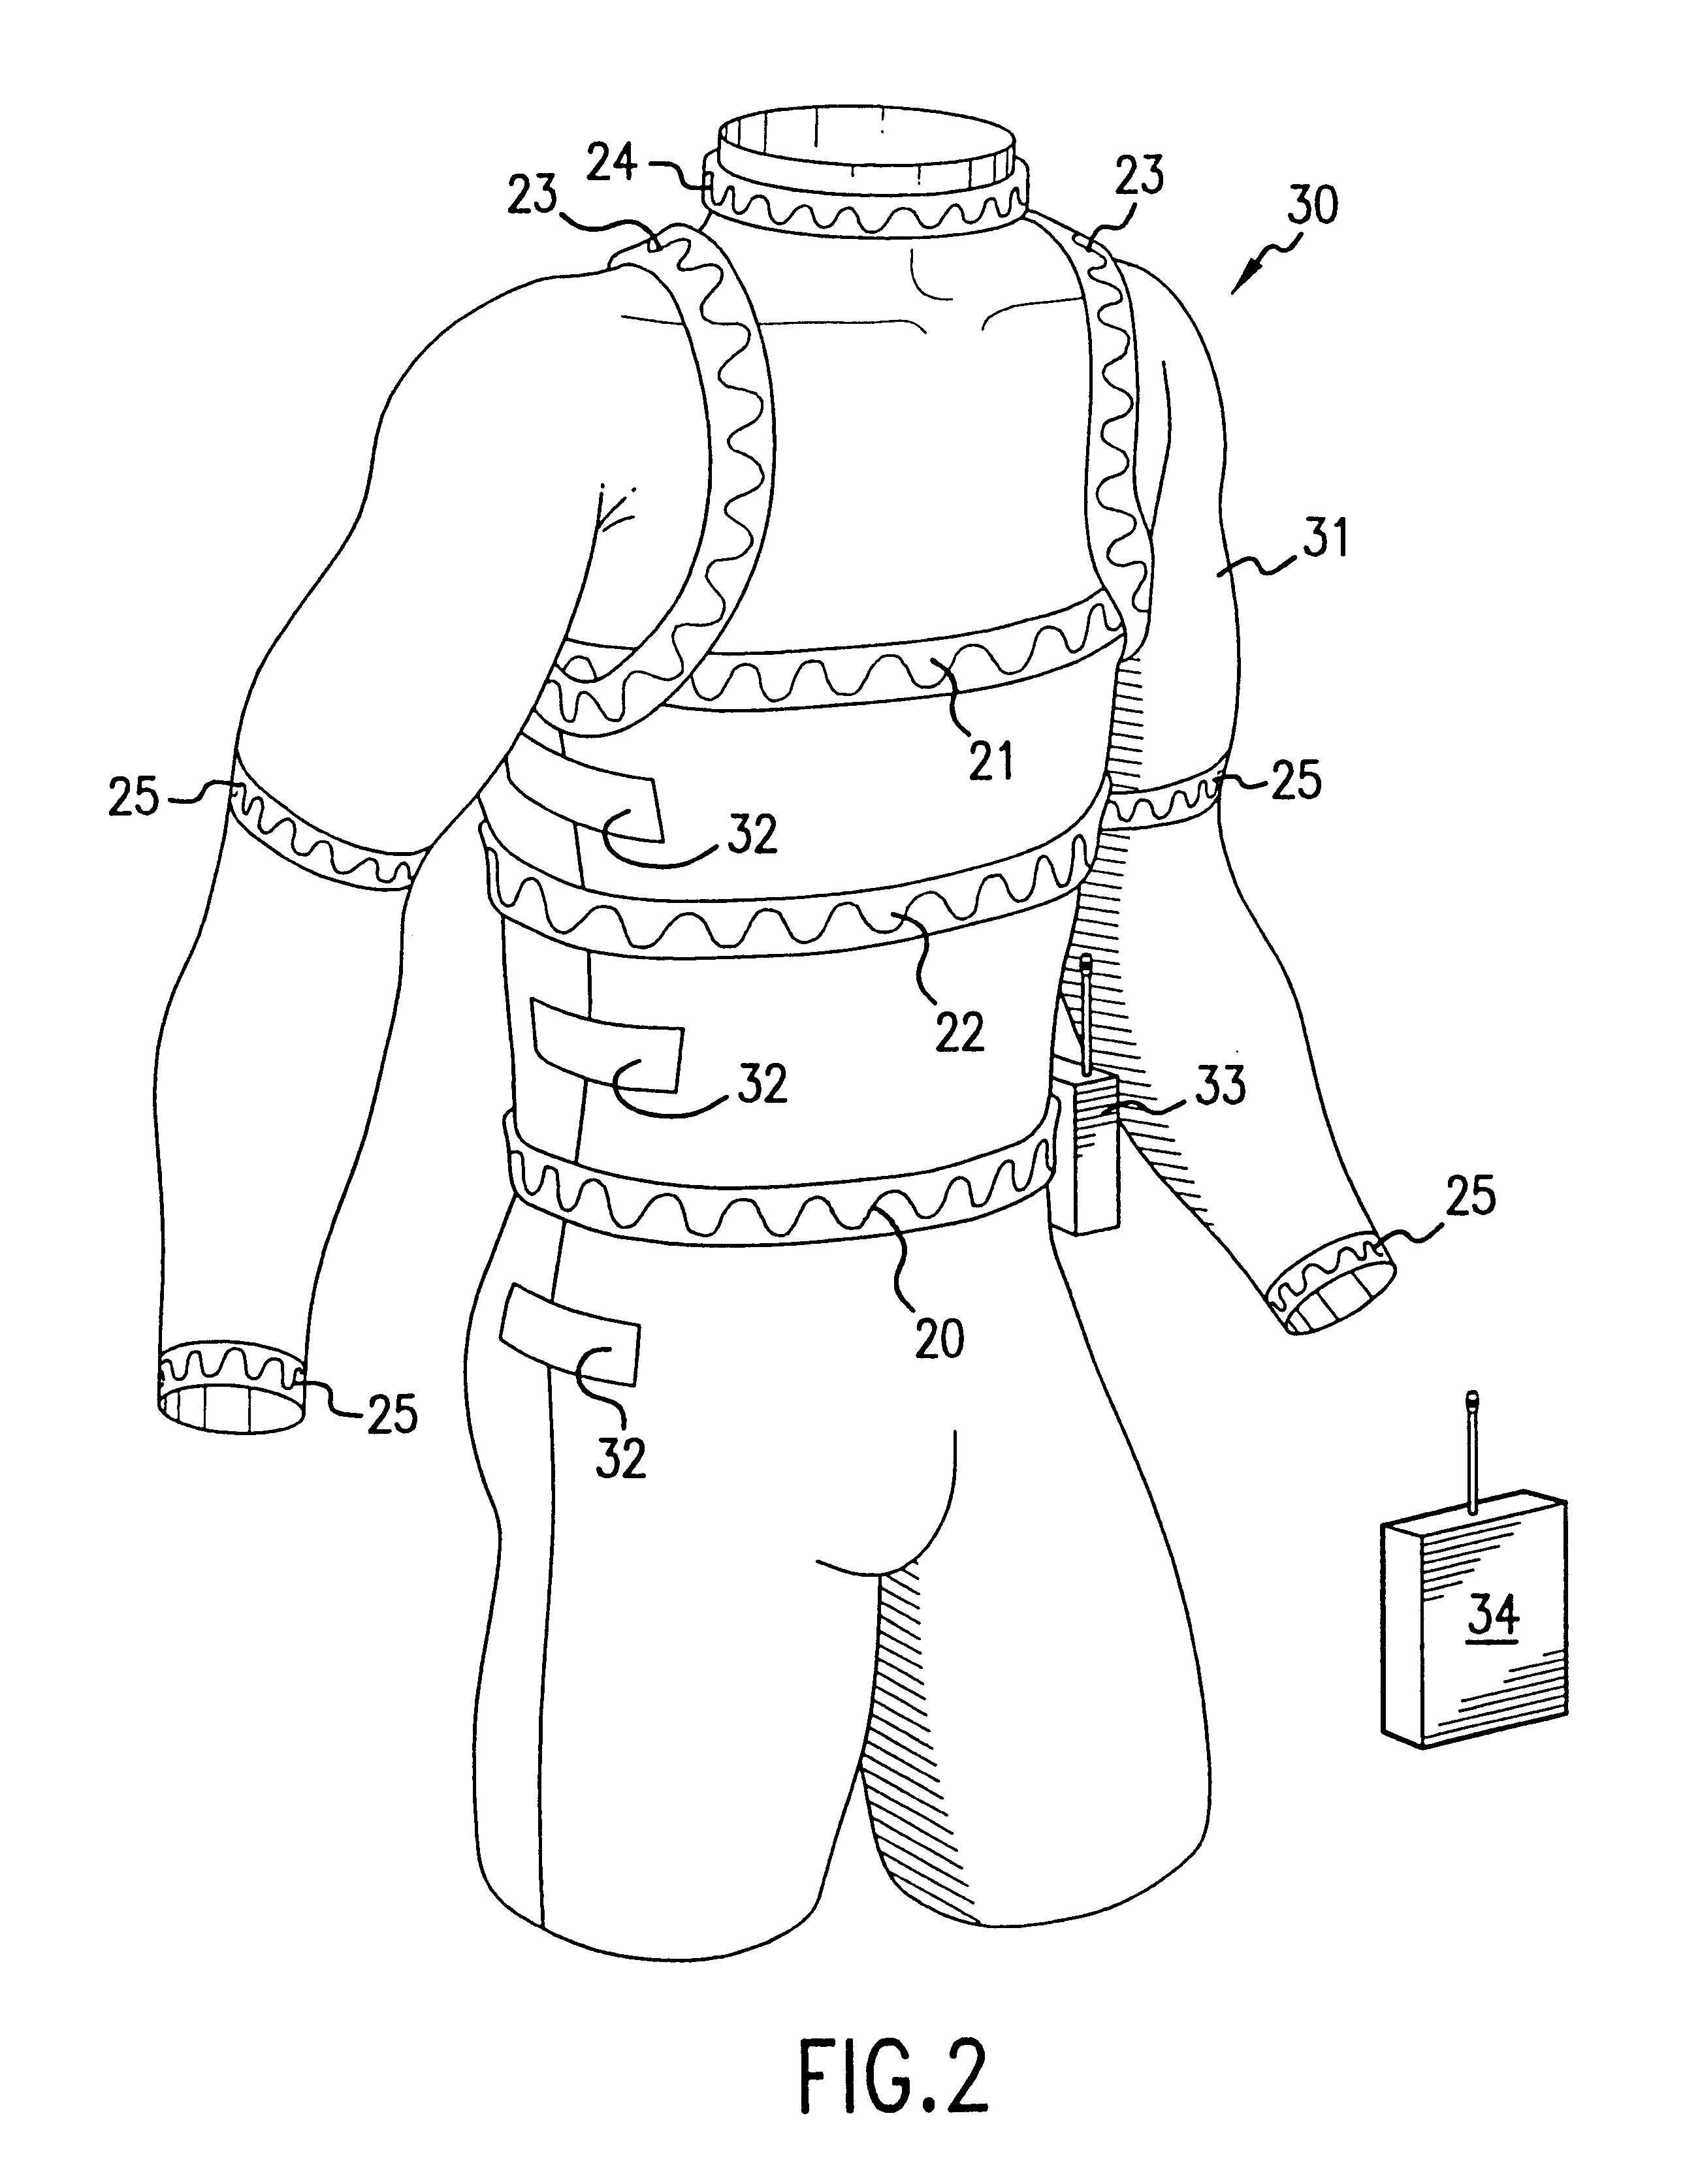 Systems and methods for ambulatory monitoring of physiological signs